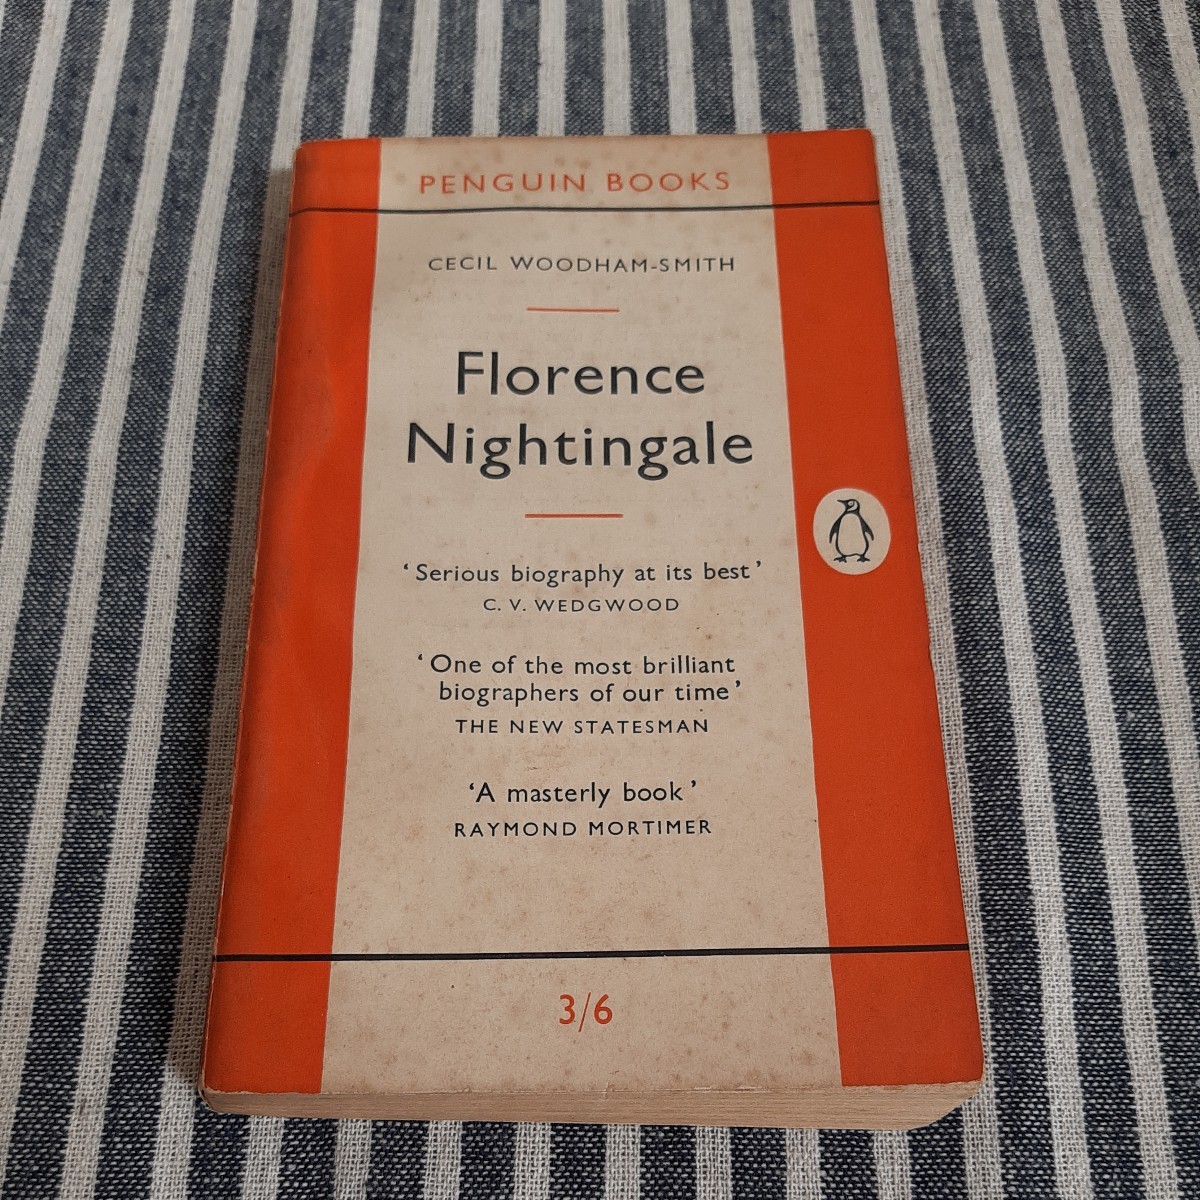 D1☆洋書☆Florence Nightingale☆CECIL WOODHAM-SMITH☆PENGUIN BOOKS☆_画像1